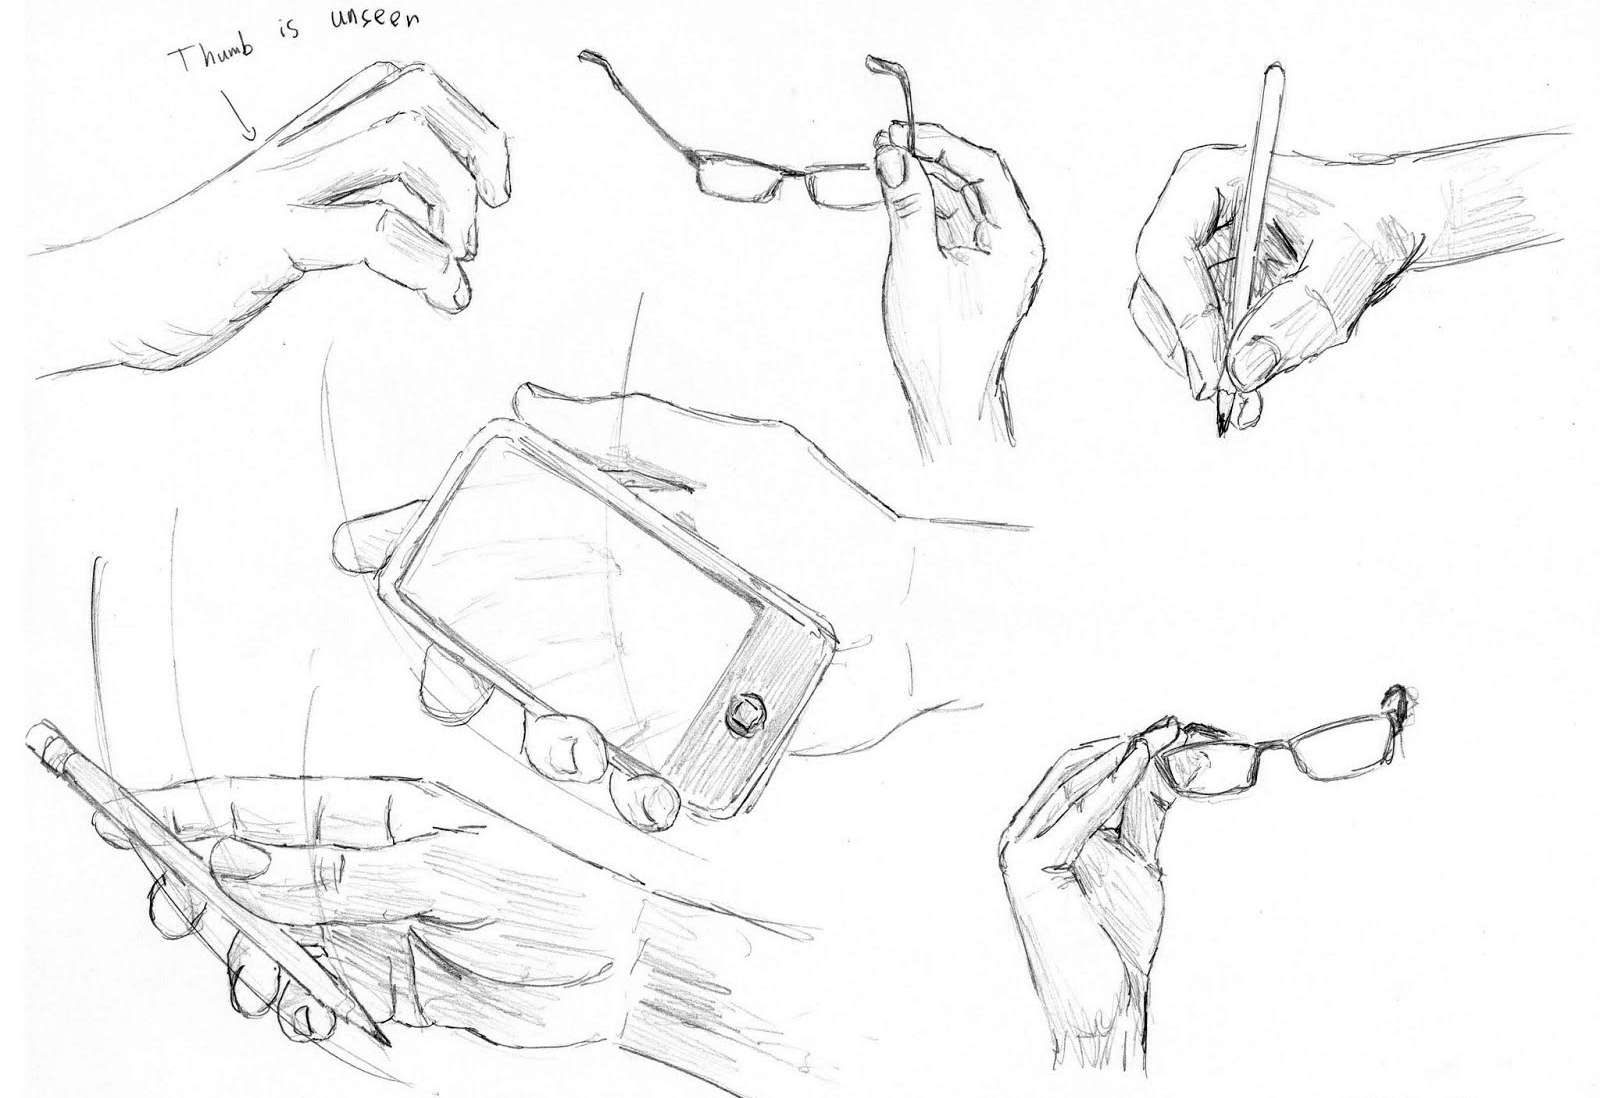 How To Draw Hands Poses Quick Reference Liron Yanconsky Hand holding phone for make photo and playing game, touchscreen display concept linear pictograms. to draw hands poses quick reference